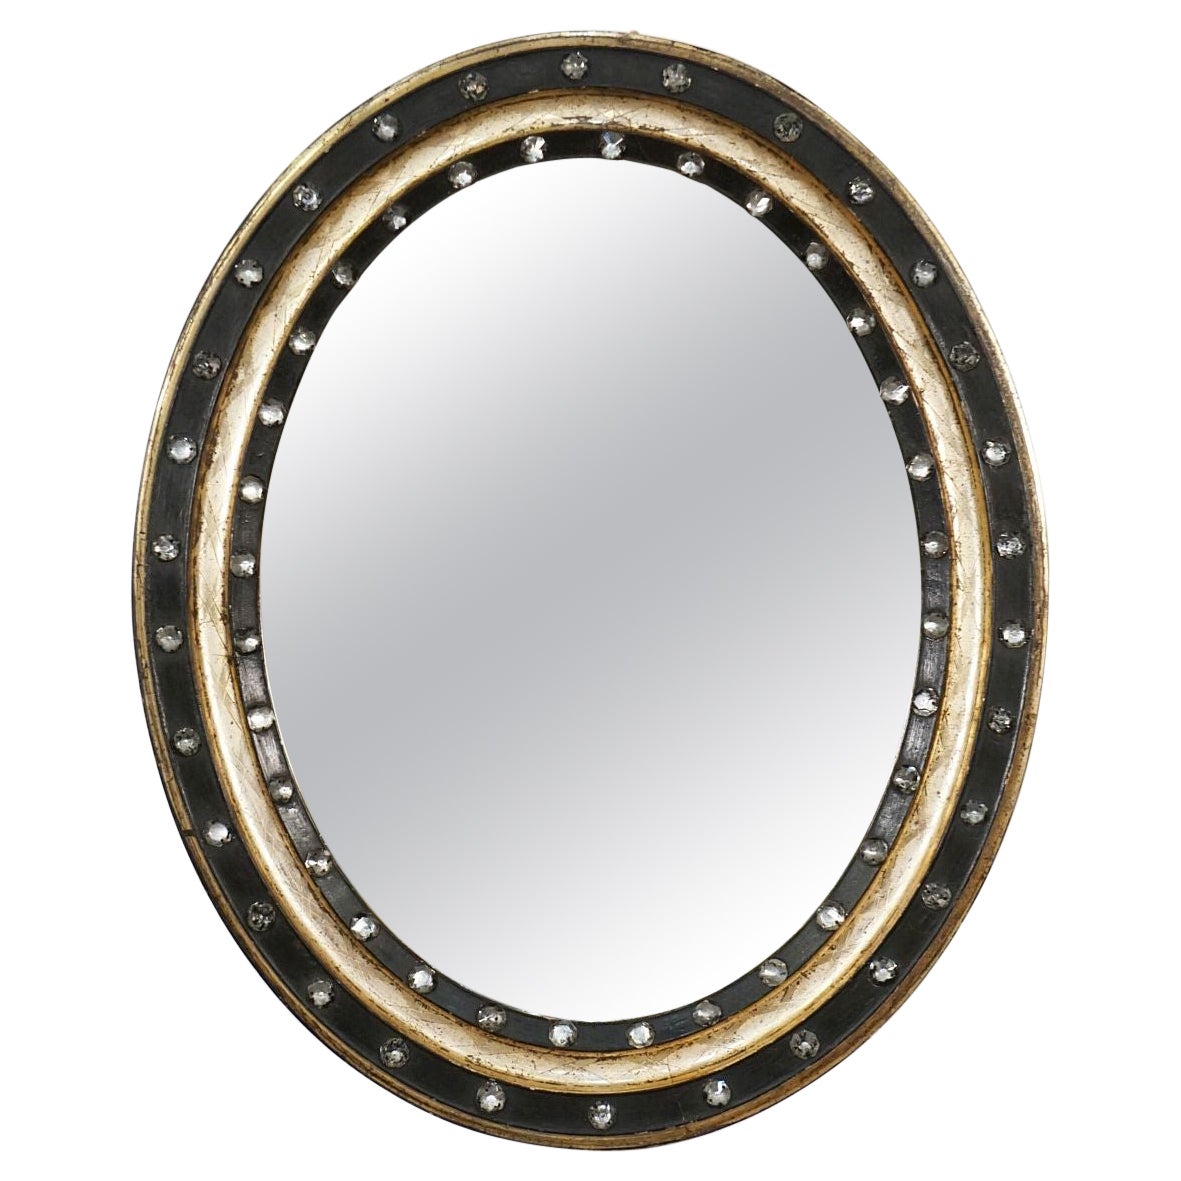 Irish Ebony and Gilt Oval Mirror with Faceted Glass Studs (H 22 1/4 x W 18 1/4)